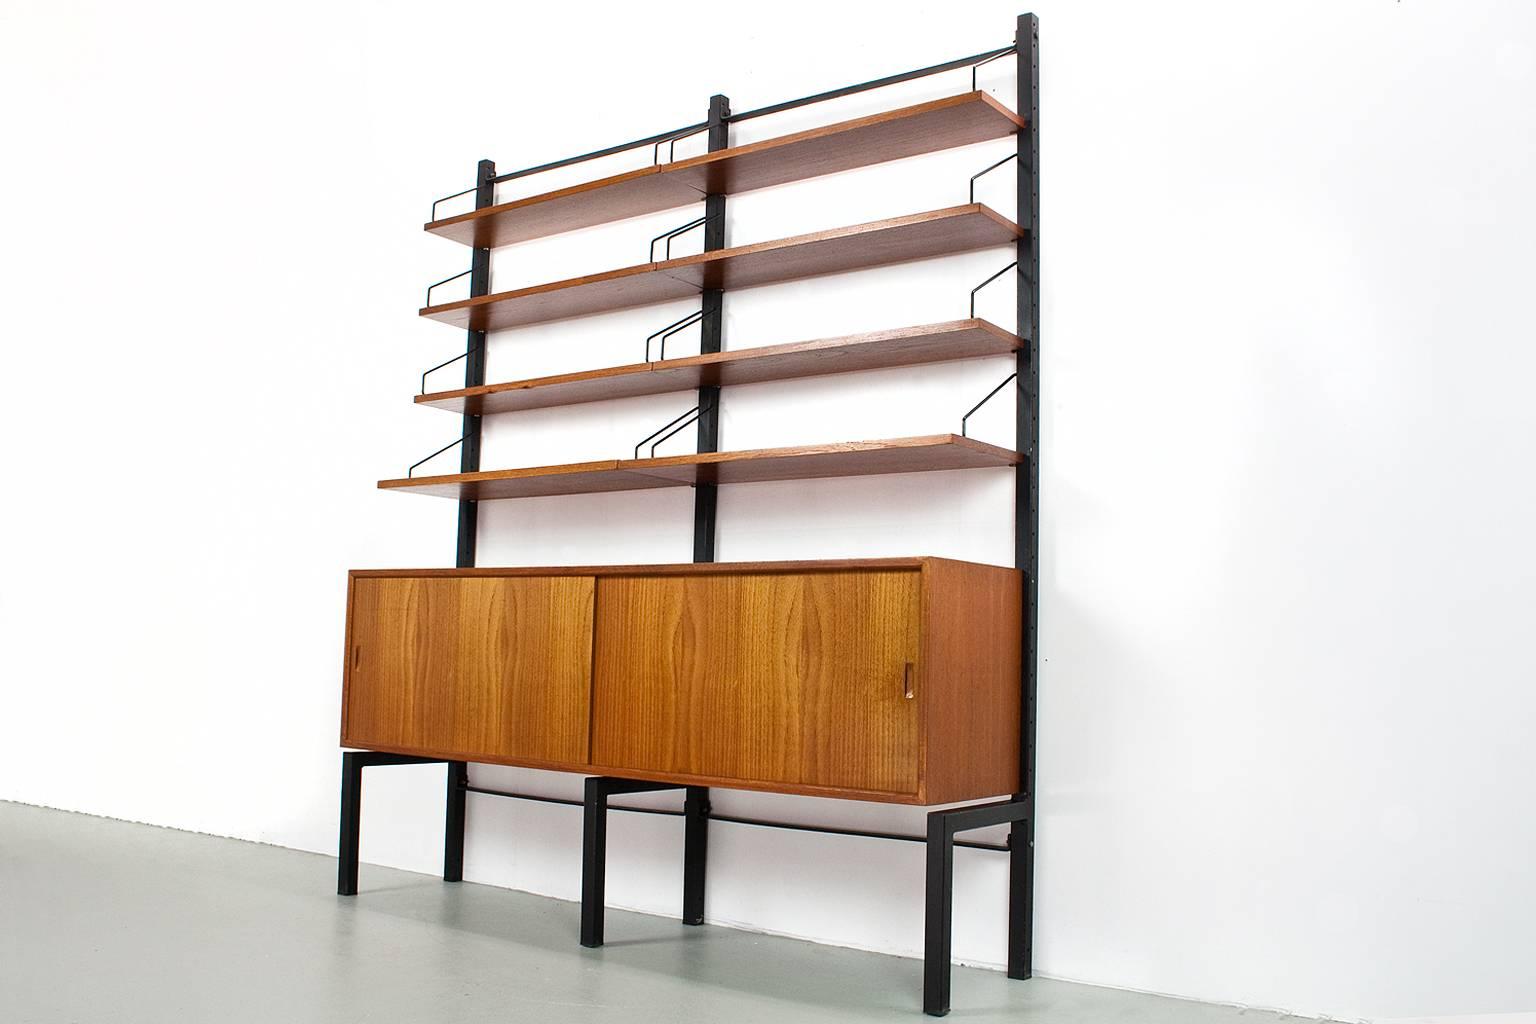 Original freestanding Mid-Century Modern wall unit designed by Poul Cadovius, model Royal, in the 1950s for Cado, Denmark. This listed unit was produced by Cado in Denmark in the 1960s. The elements features a lovely quality teak veneer with black